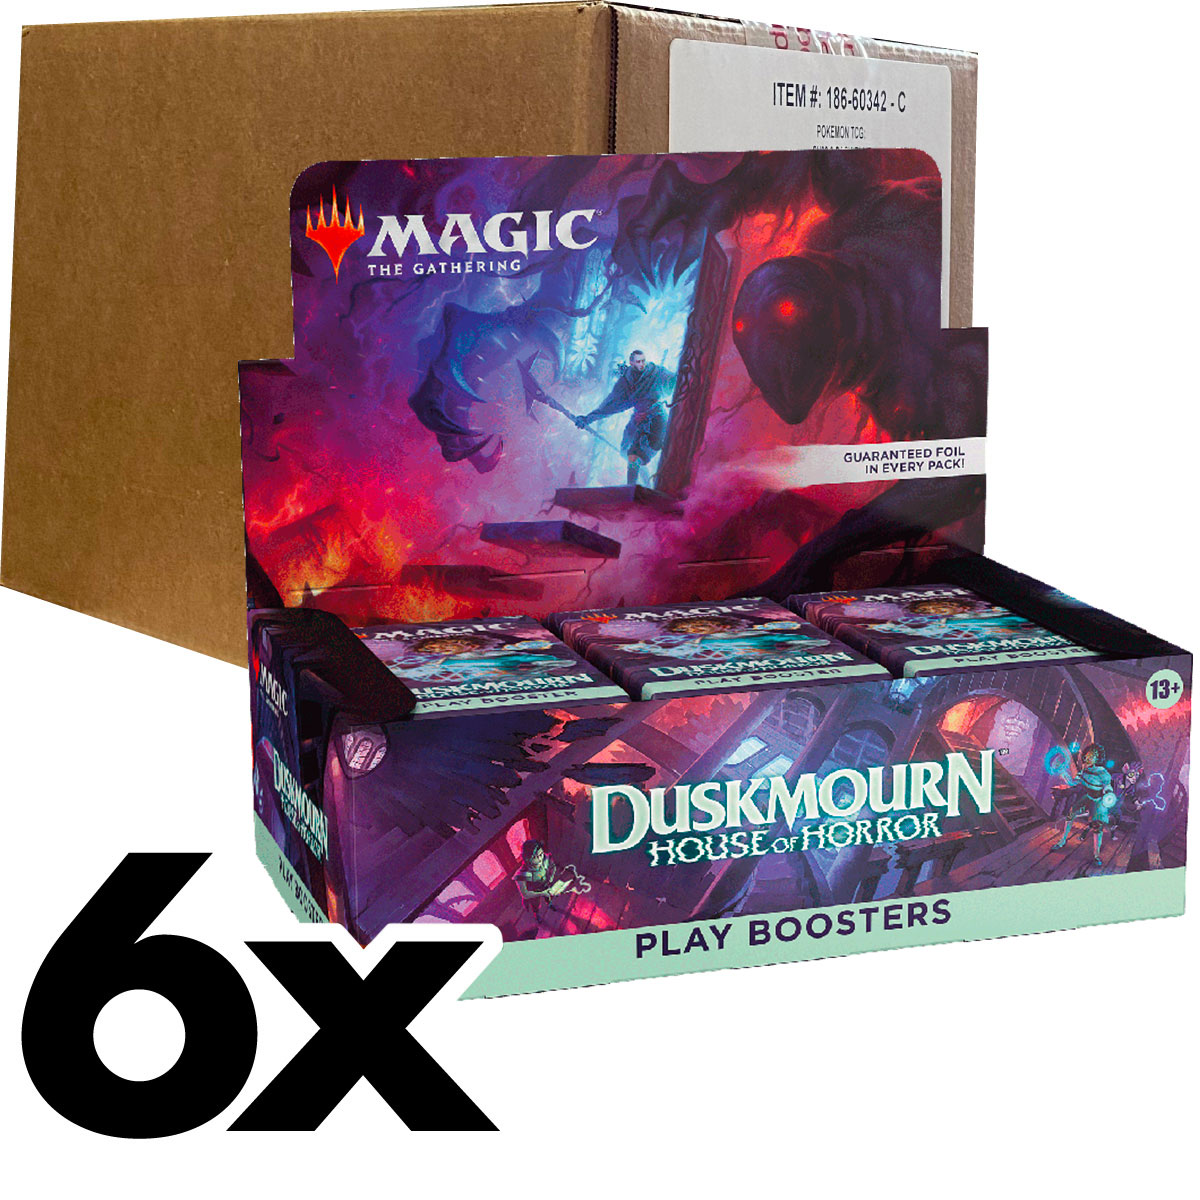 magic the gathering - duskmourn: house of horror - play booster - case sigillato box 36 buste (eng)